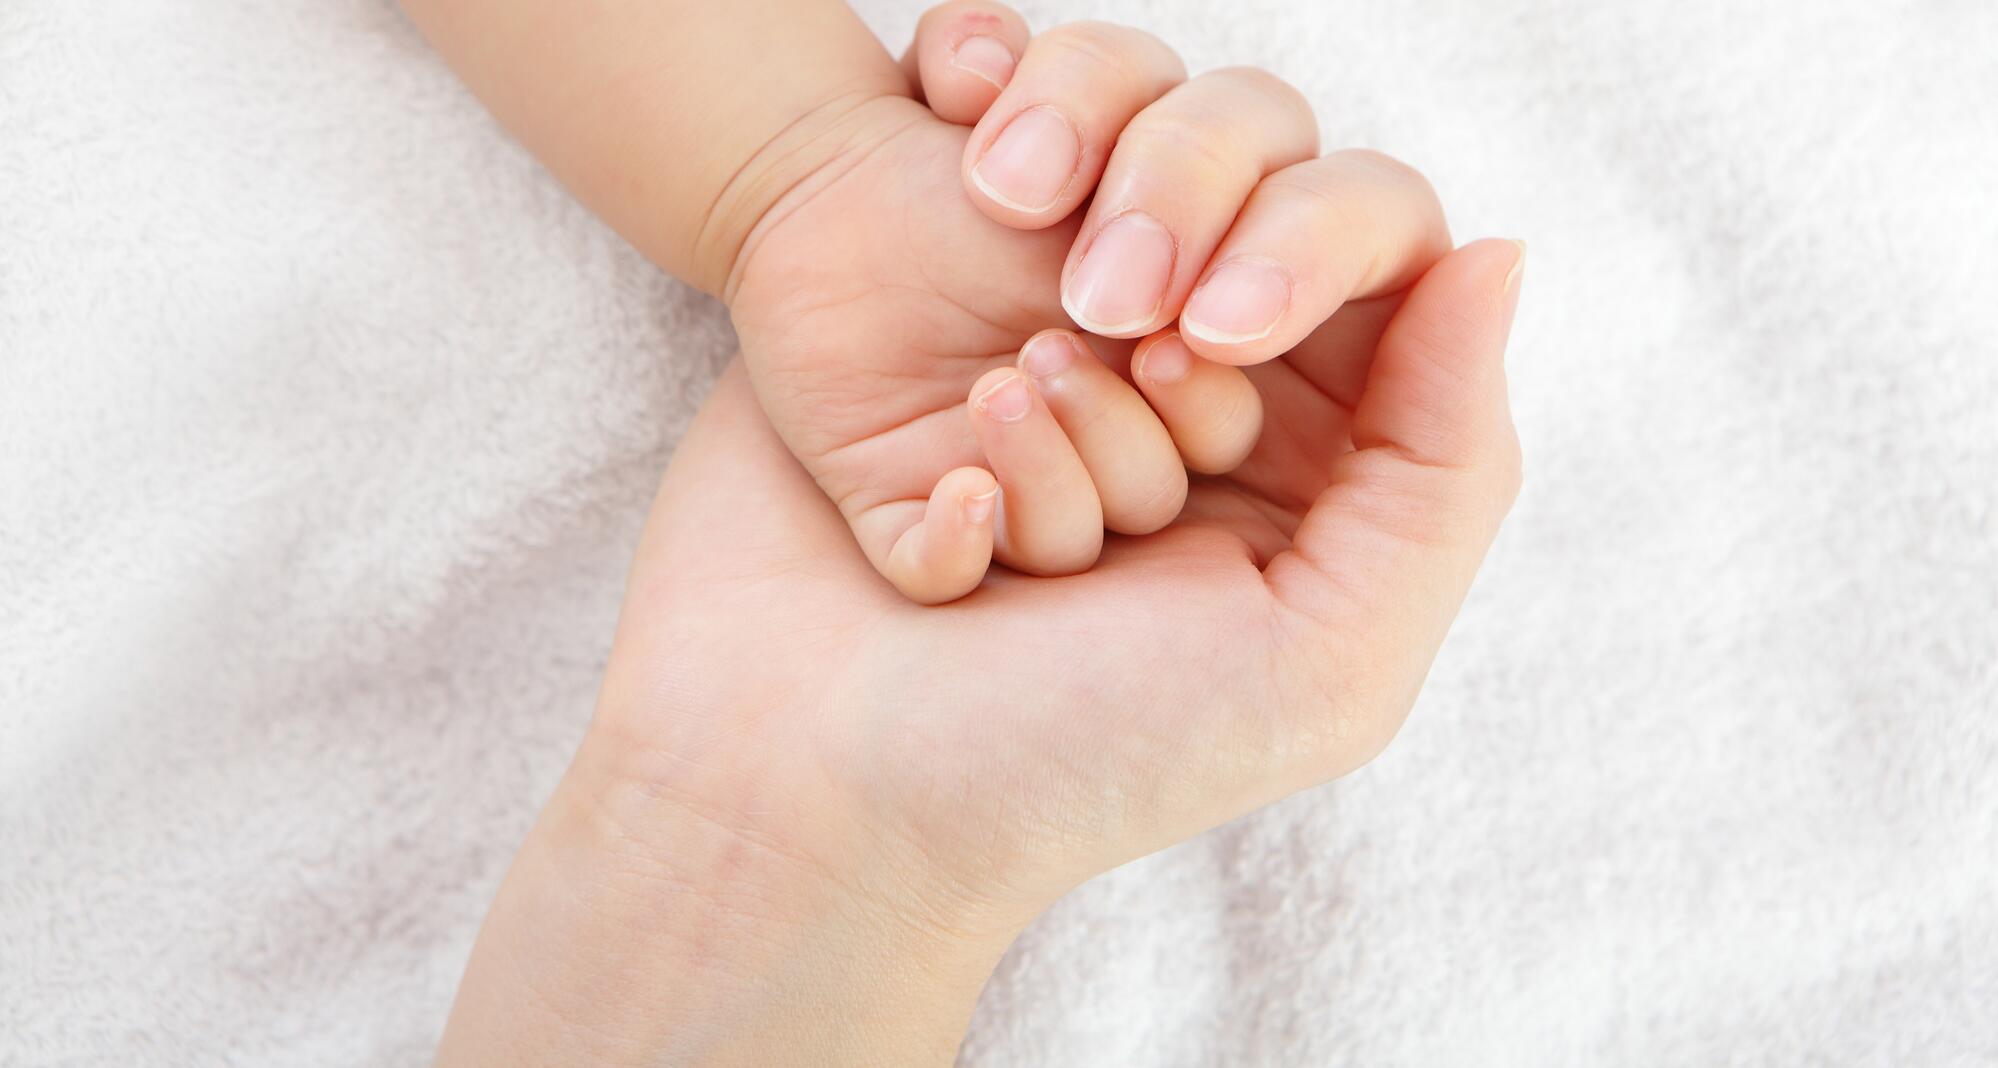 ad_atopic-dermatitis_baby hand_large_2021